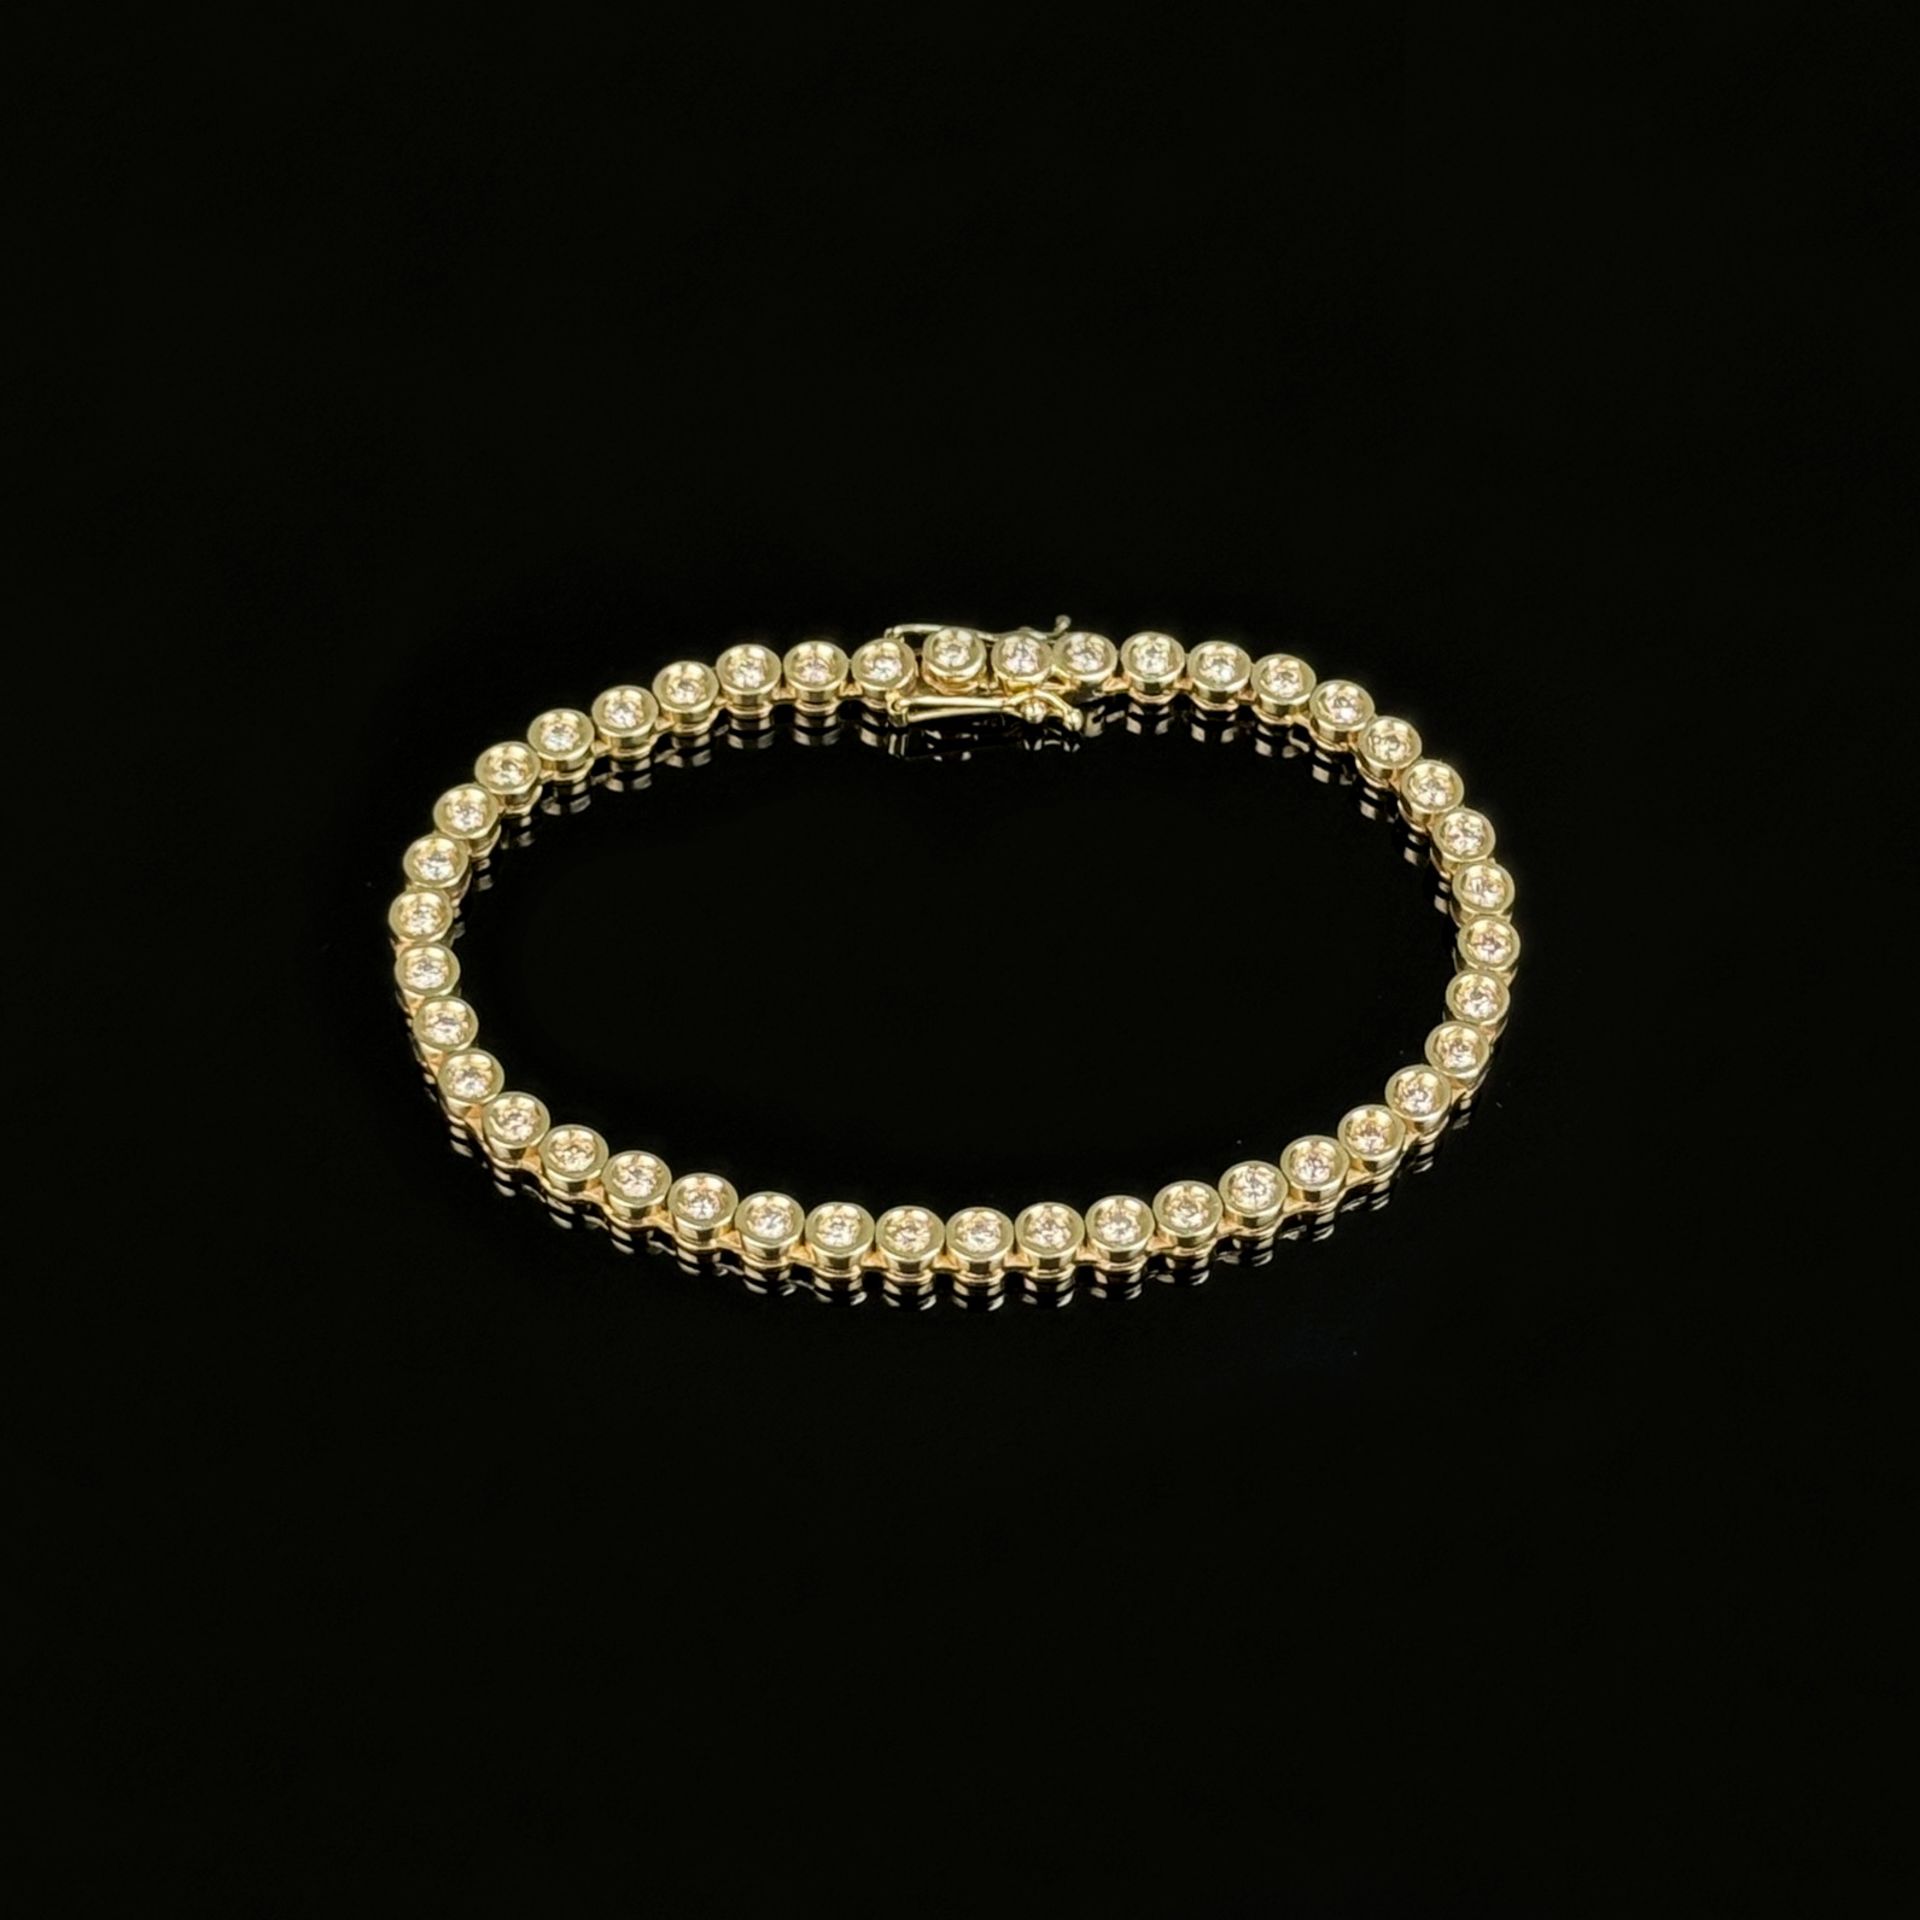 Tennis bracelet, 585/14K yellow gold (hallmarked), 13.86g, set with a total of 42 brilliant-cut dia